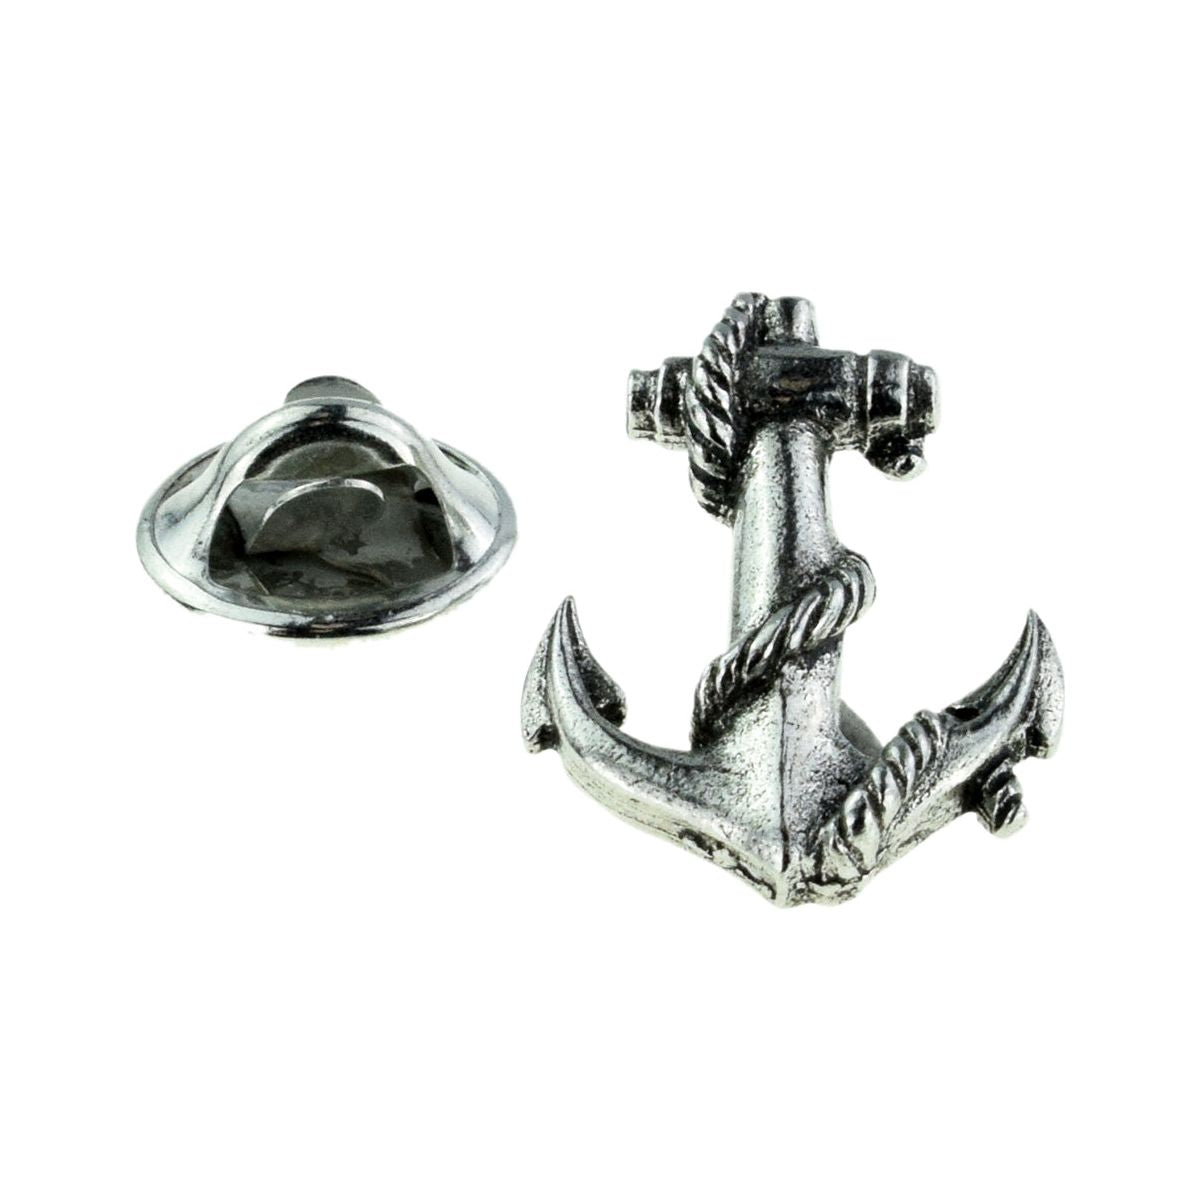 Nautical Anchor & Chain Pewter Lapel Pin Badge - Ashton and Finch